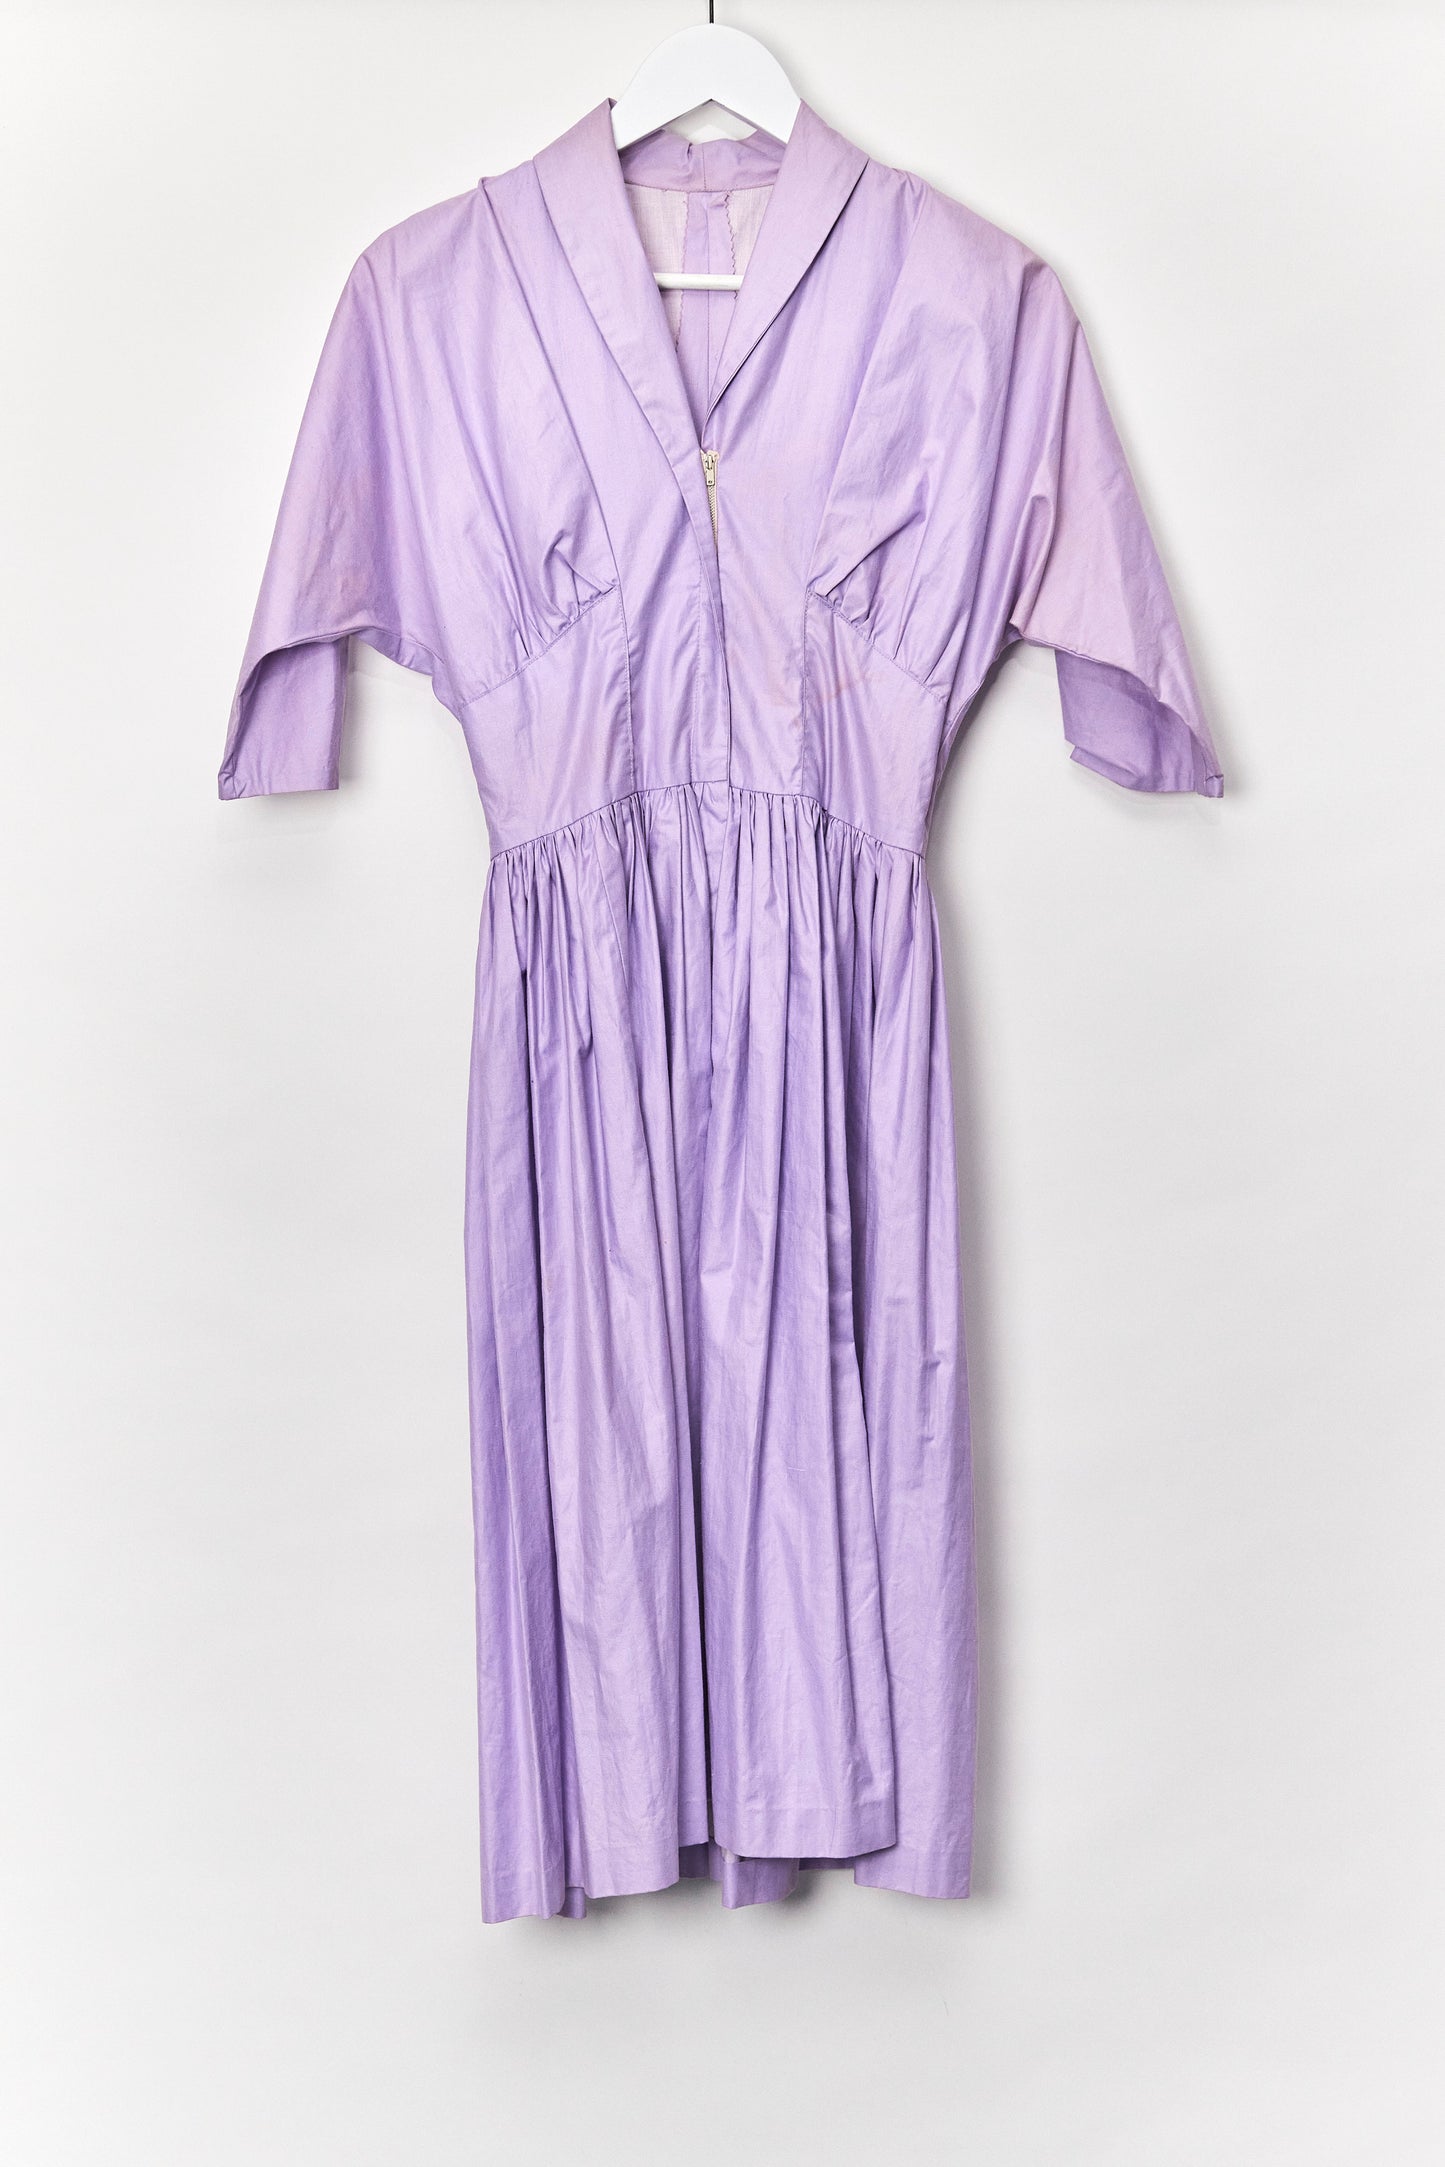 Womens lilac 1950's vintage fitted dress size small